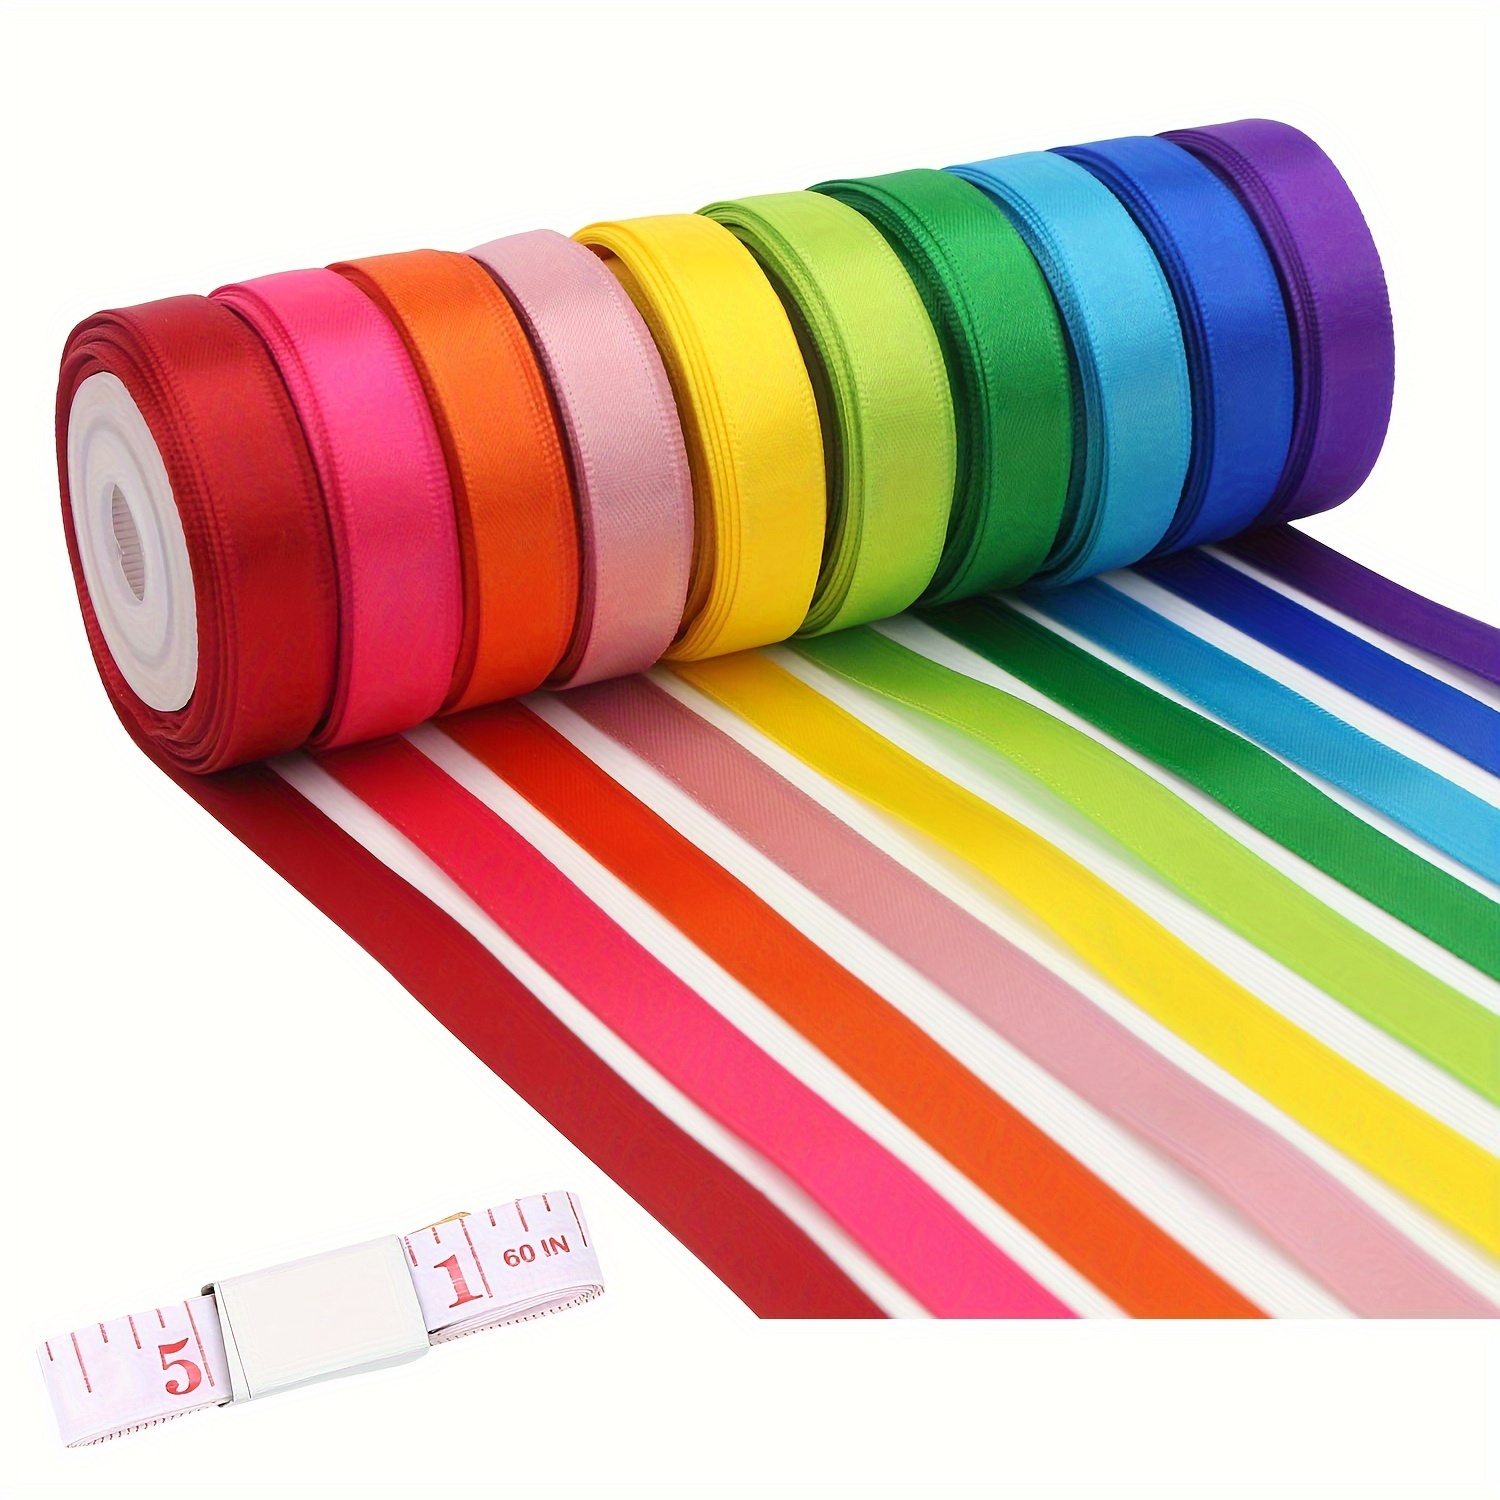 

10pcs Multicolor Polyester Satin Ribbon Set With Tape Measure, Each 0.39'' (10mm) X 24 Yards, Solid Color Fabric Ribbon For Gift Wrapping, Chair Sashes, Valentine's, Weddings, Birthdays, Party Decors